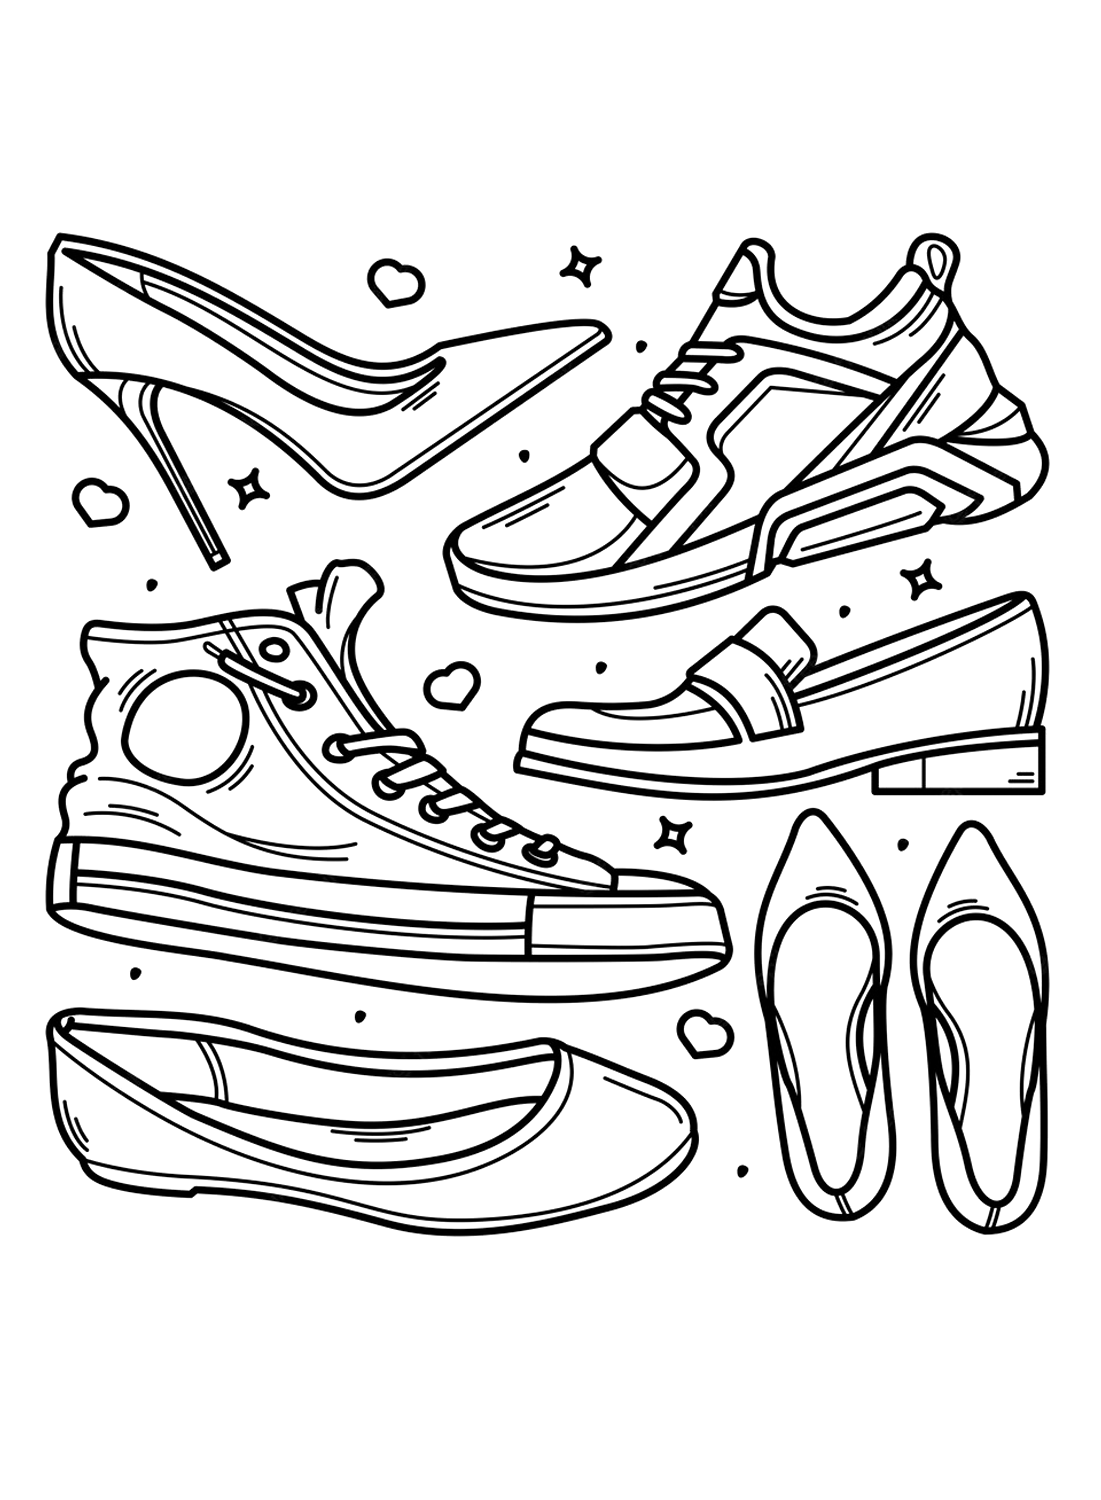 Many types of shoes to color